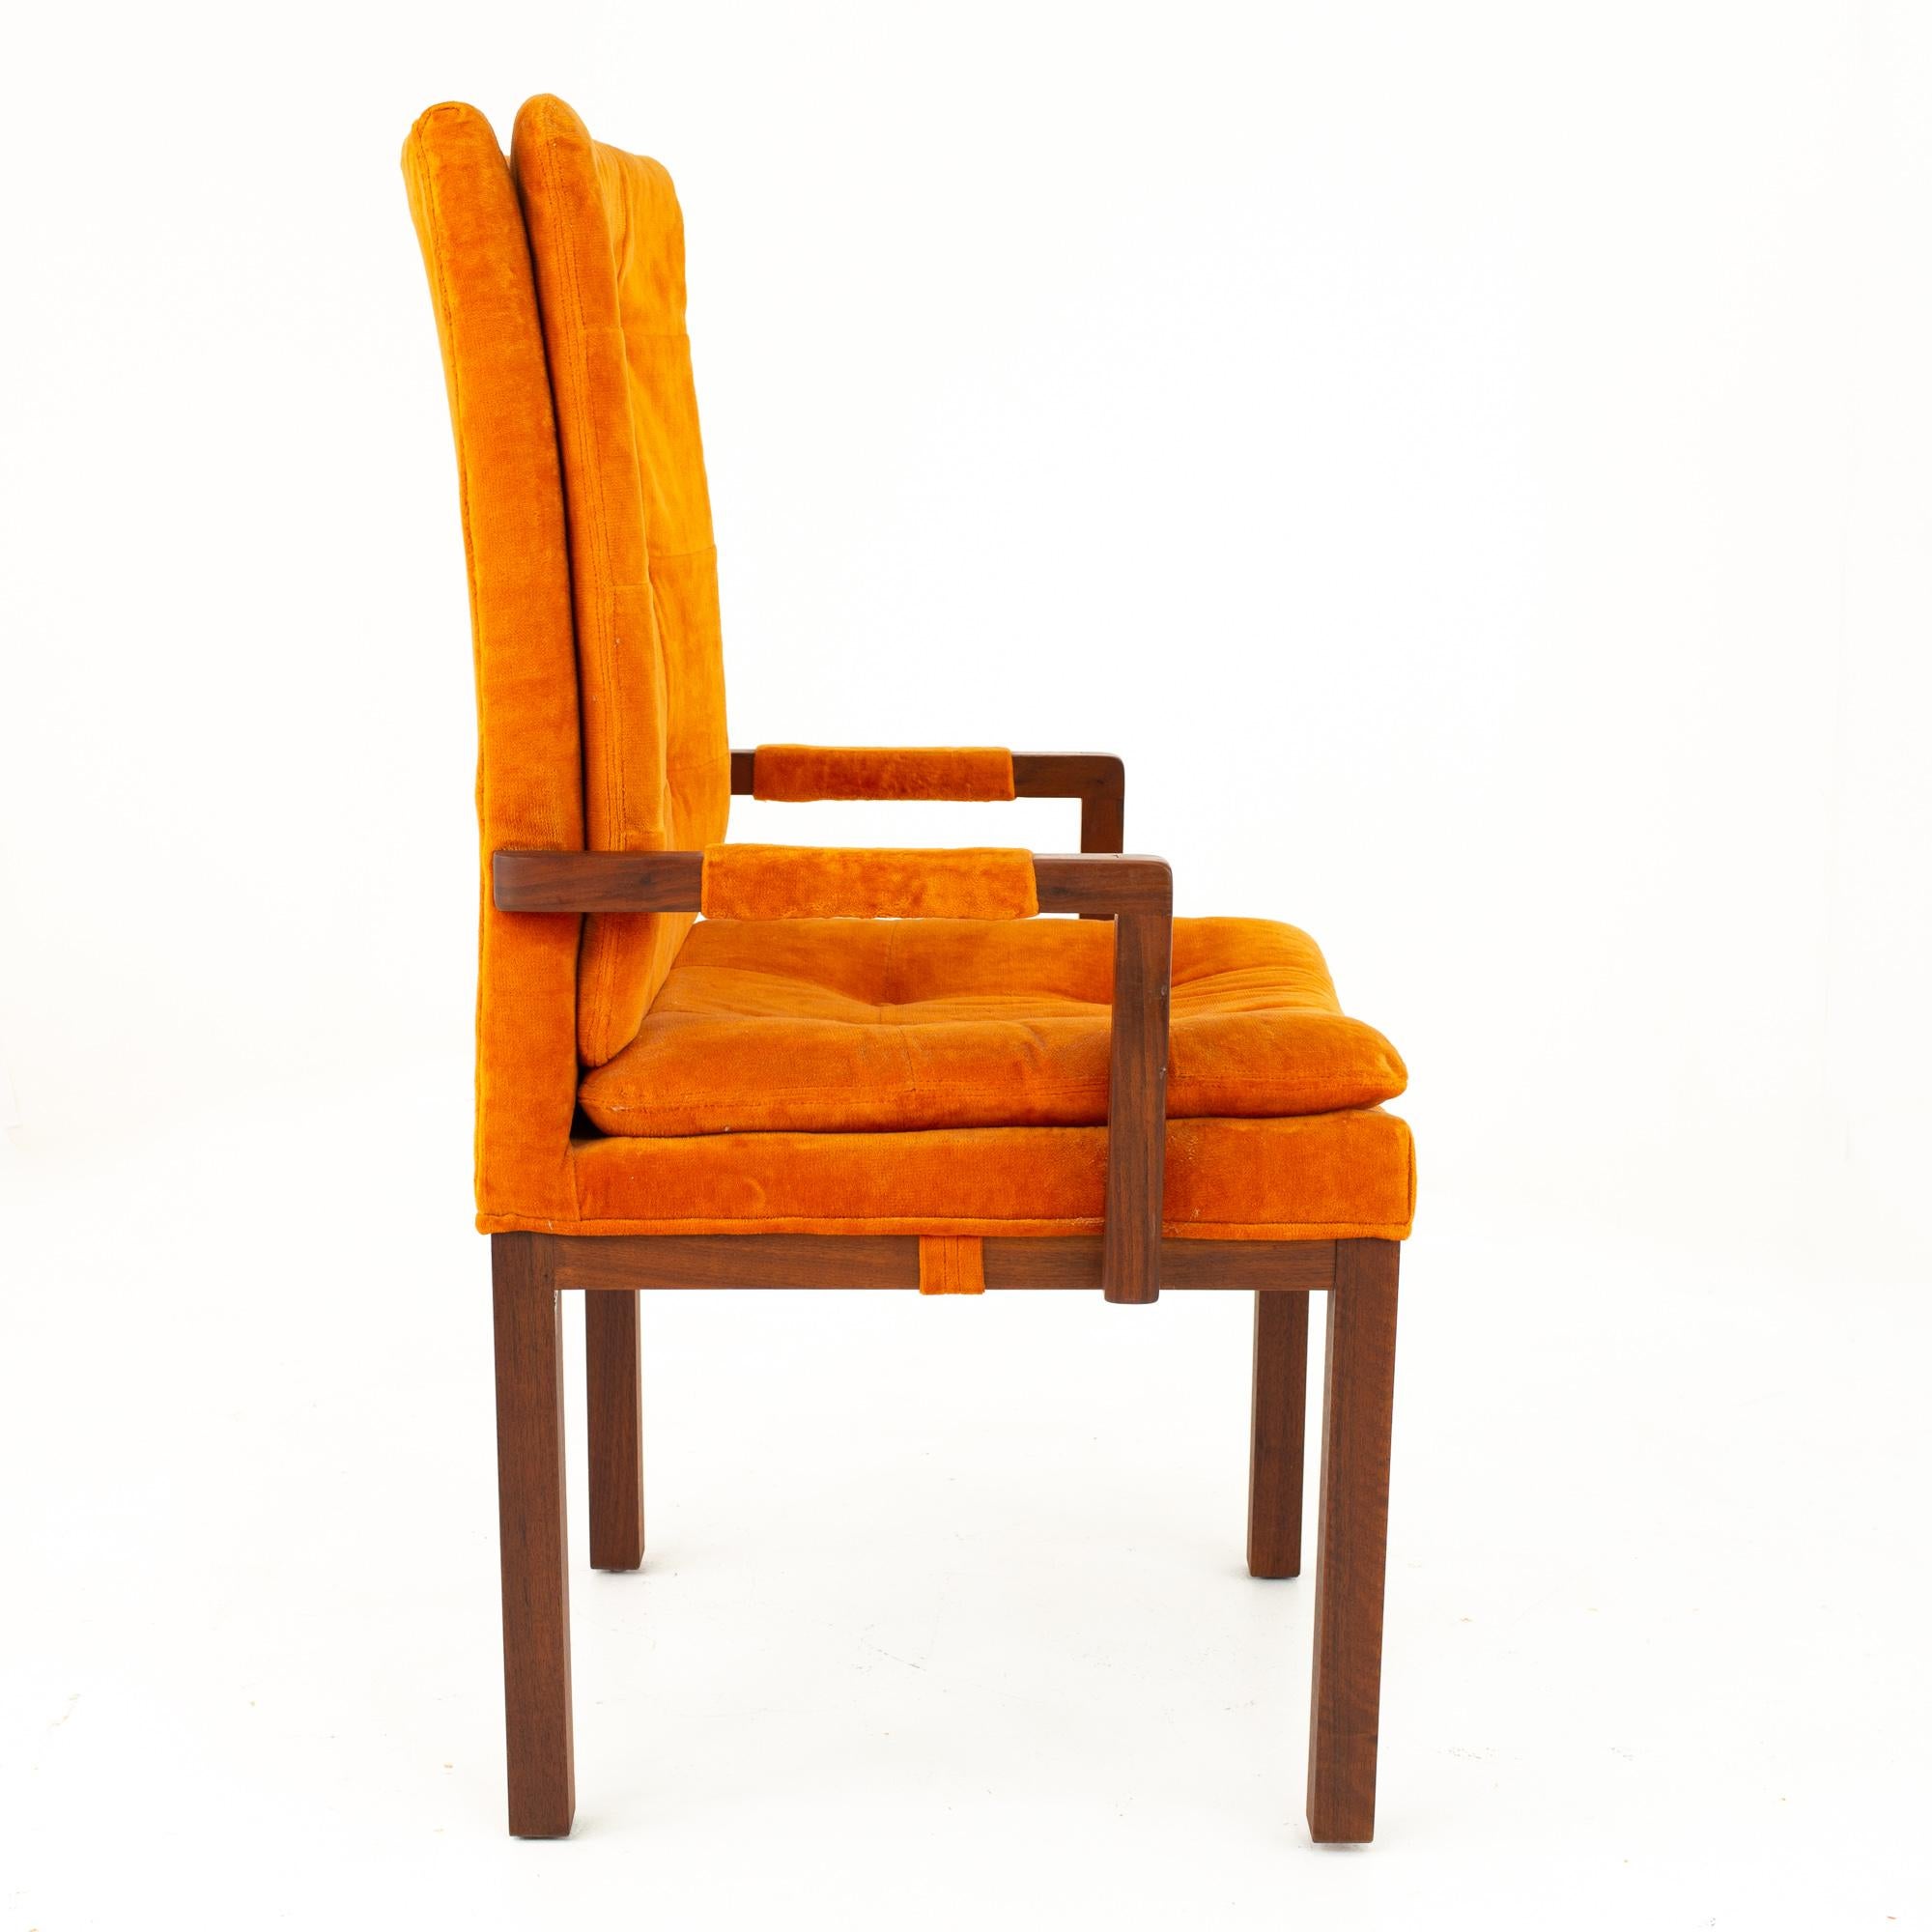 Milo Baughman Style Dillingham Orange and Walnut Upholstered Dining Chairs - Set 2